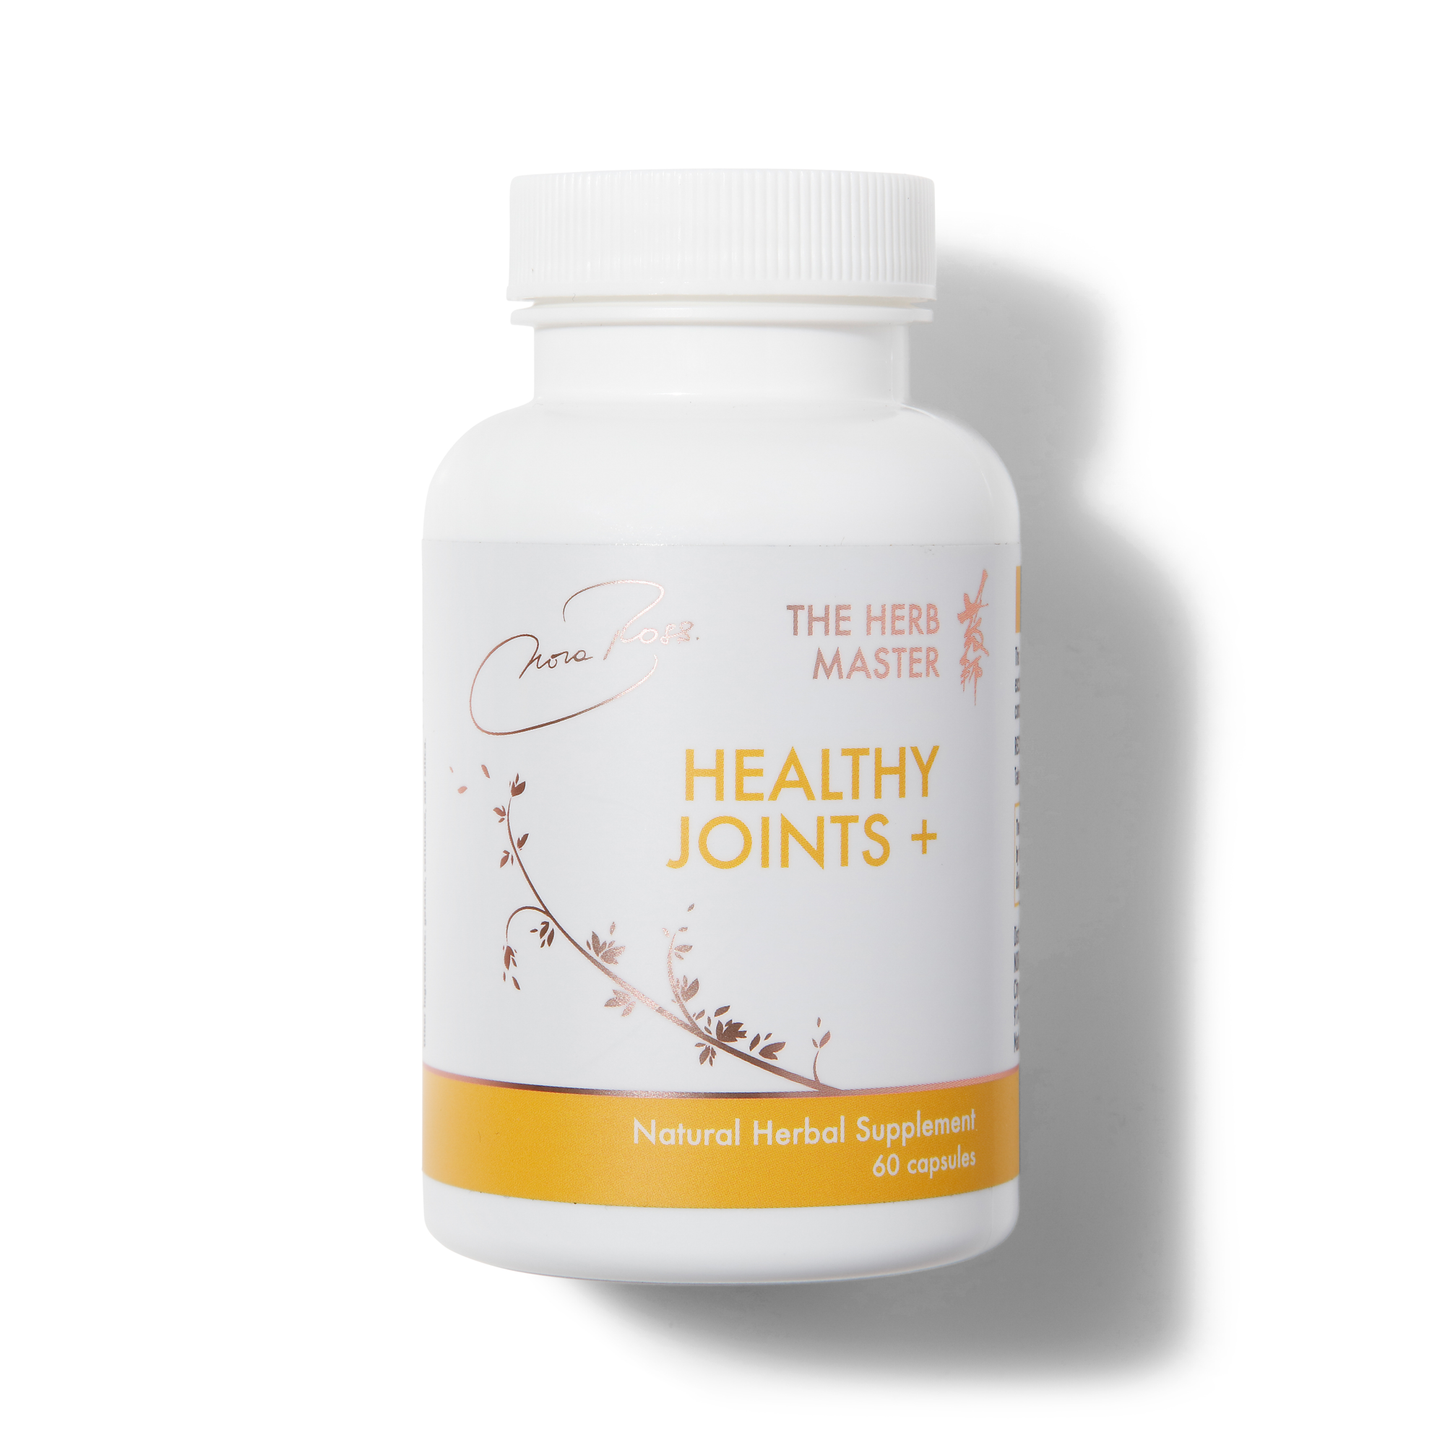 Healthy Joints Plus® Supplements - Joint Support Supplement for Relief with Glucosamine, Chondroitin & MSM